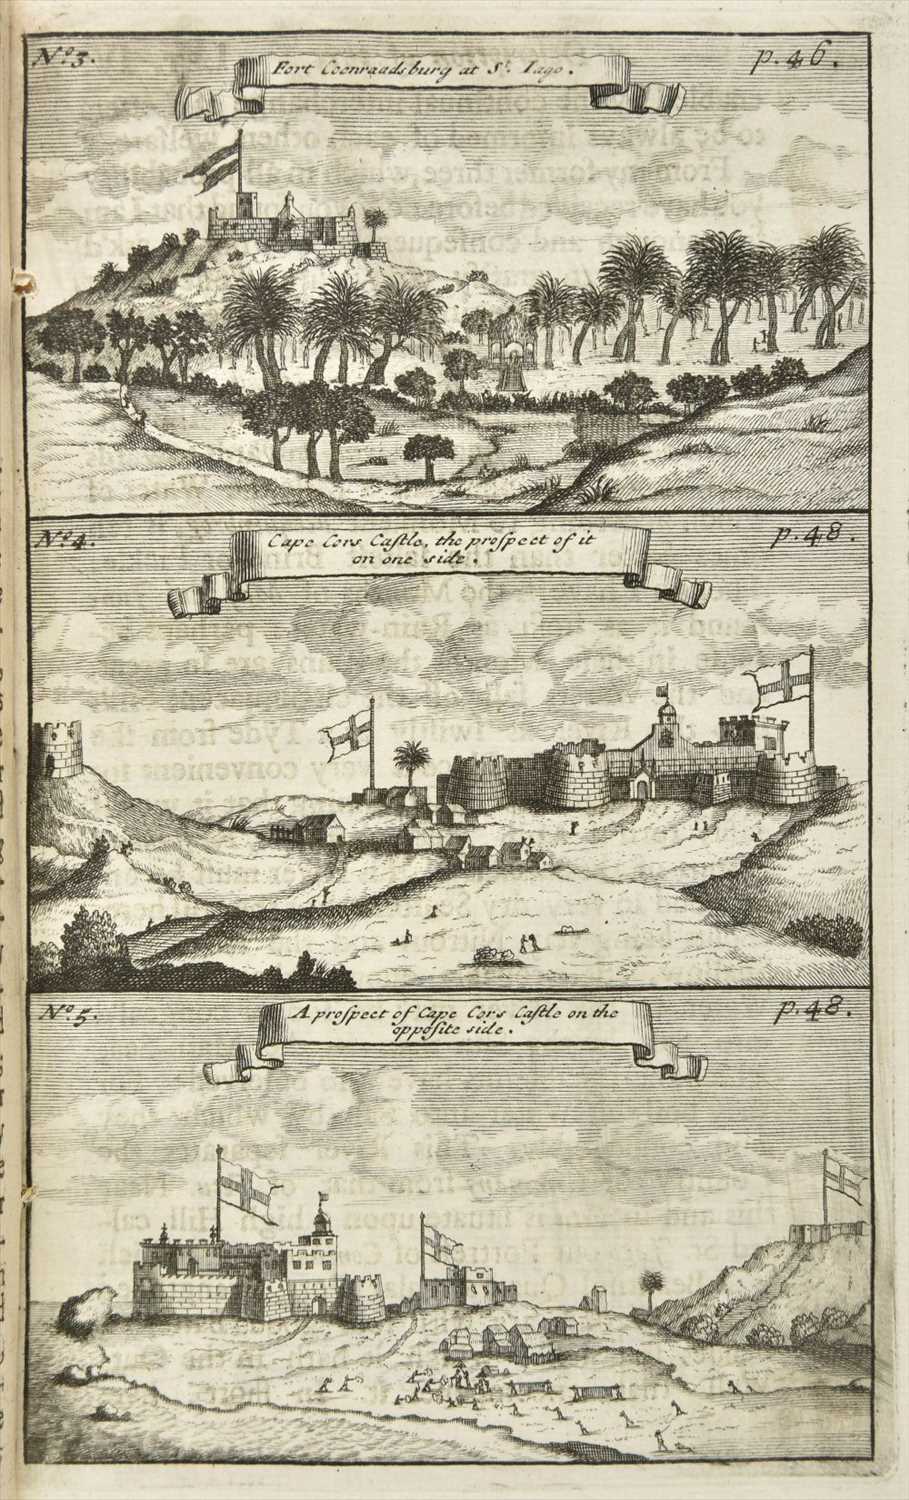 Lot 3 - Bosman (Willem). A New and Accurate Description of the Coast of Guinea, 1705